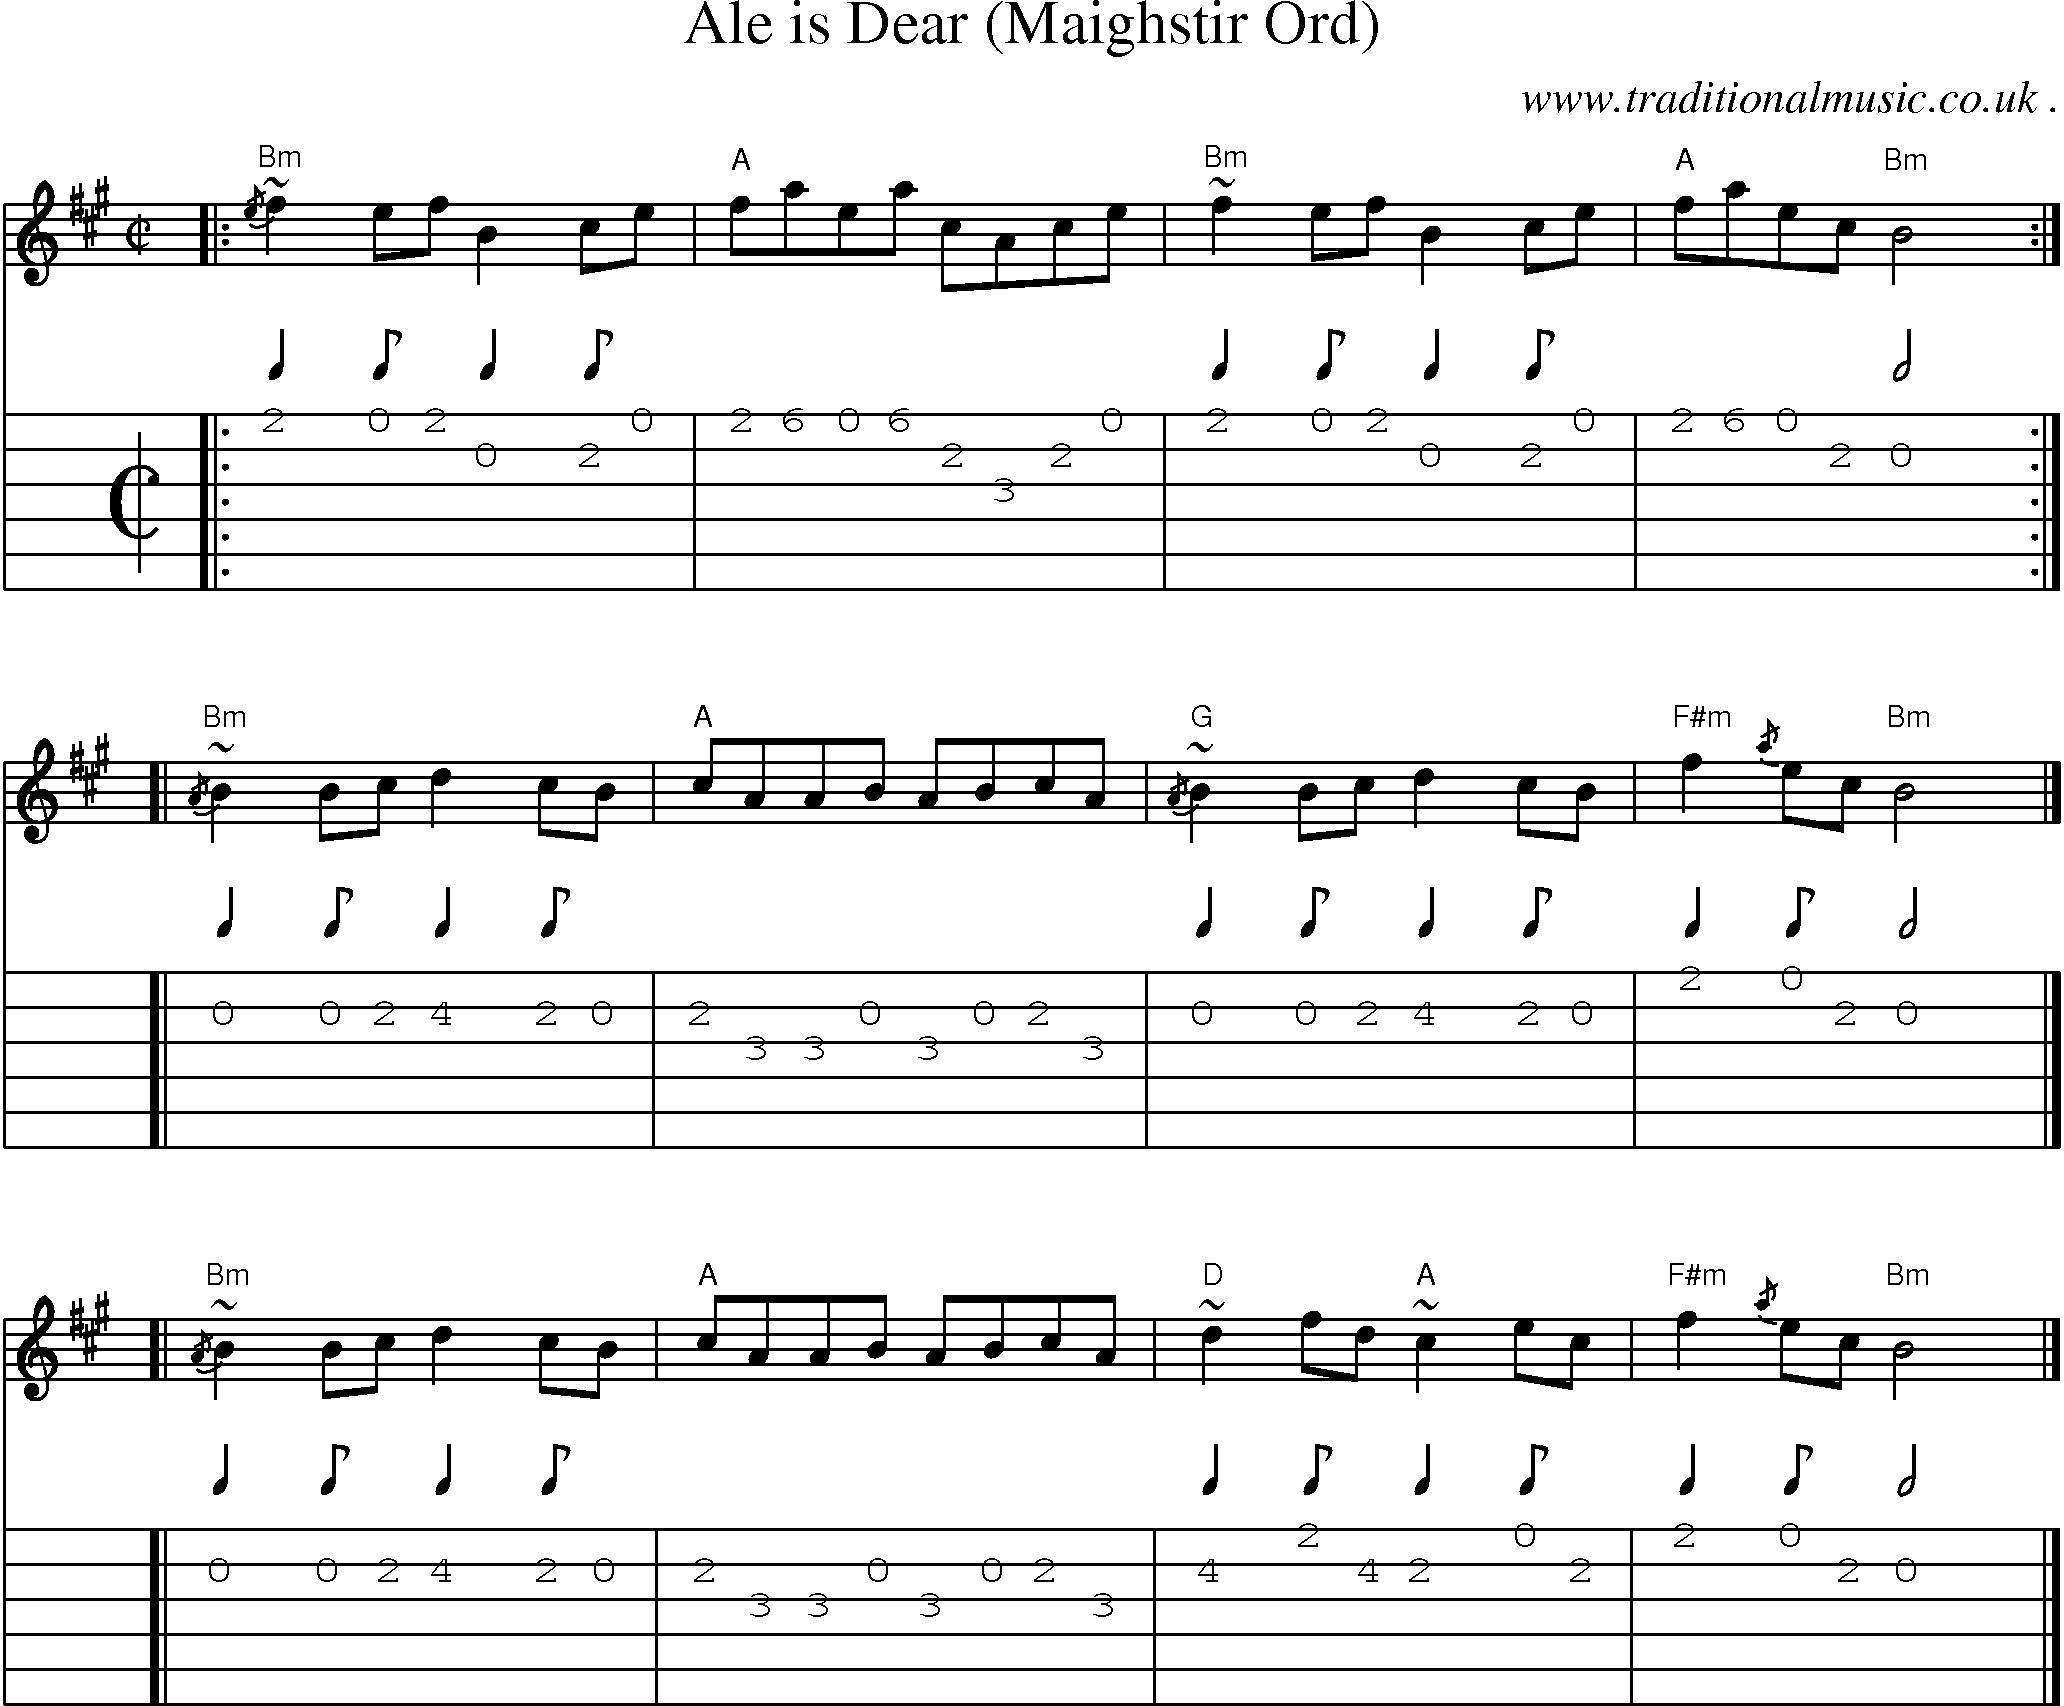 Sheet-music  score, Chords and Guitar Tabs for Ale Is Dear Maighstir Ord